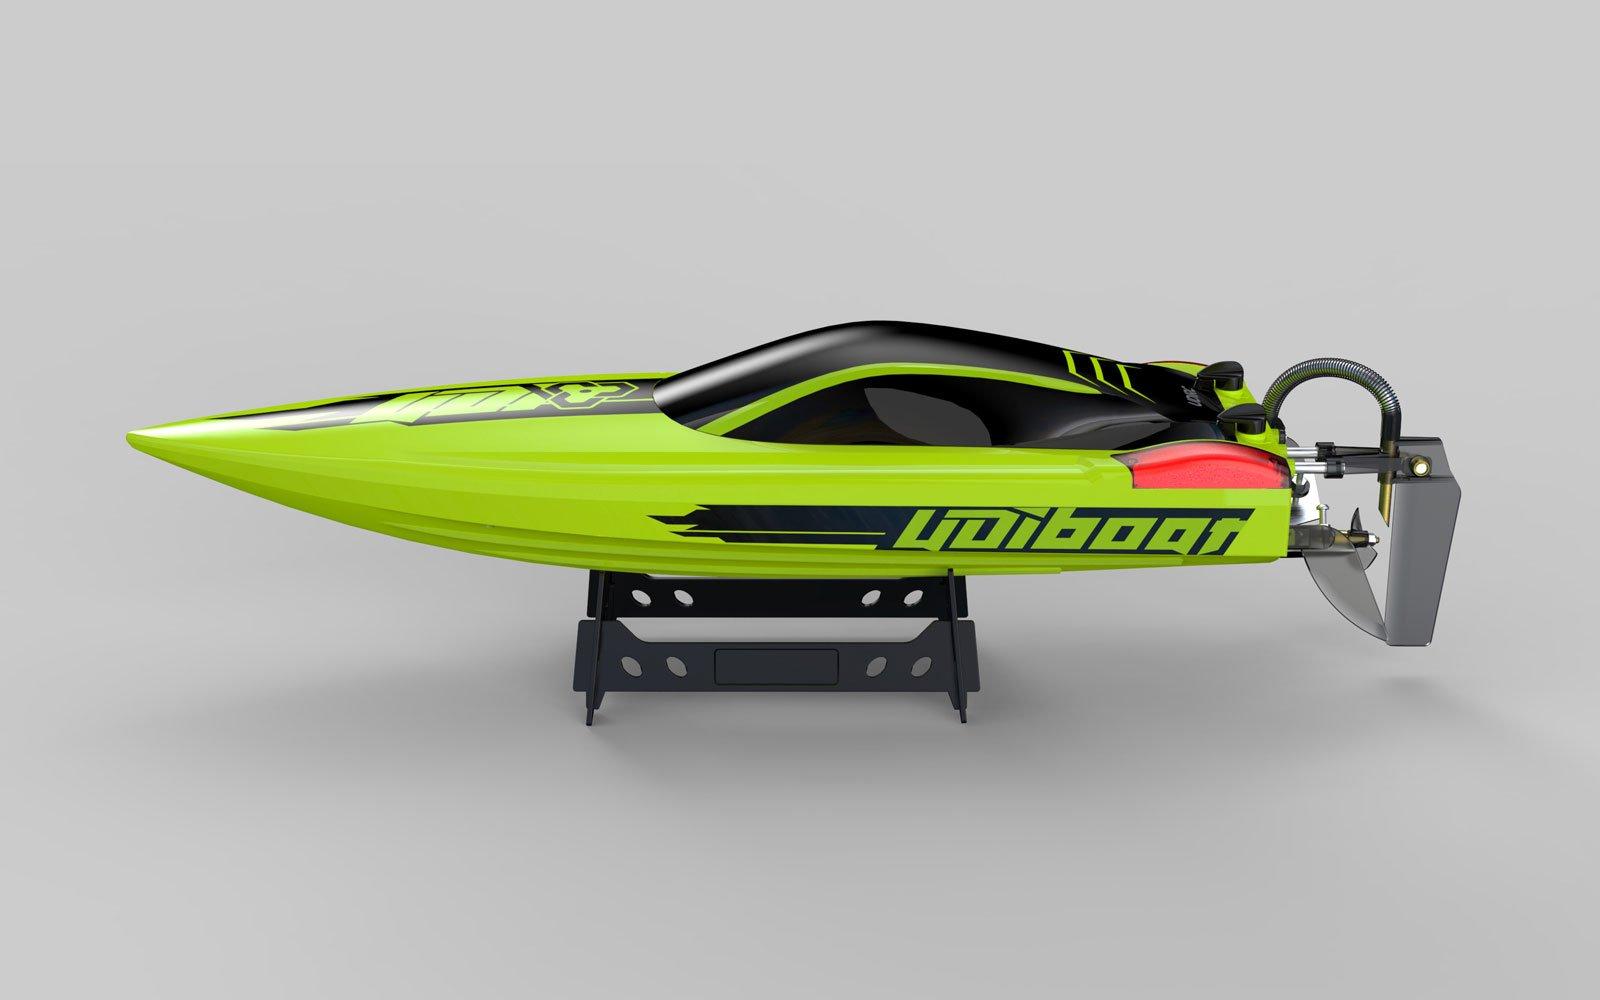 Green Rc Boat: Green RC boats: A guide to eco-friendly options for every budget and level of performance.